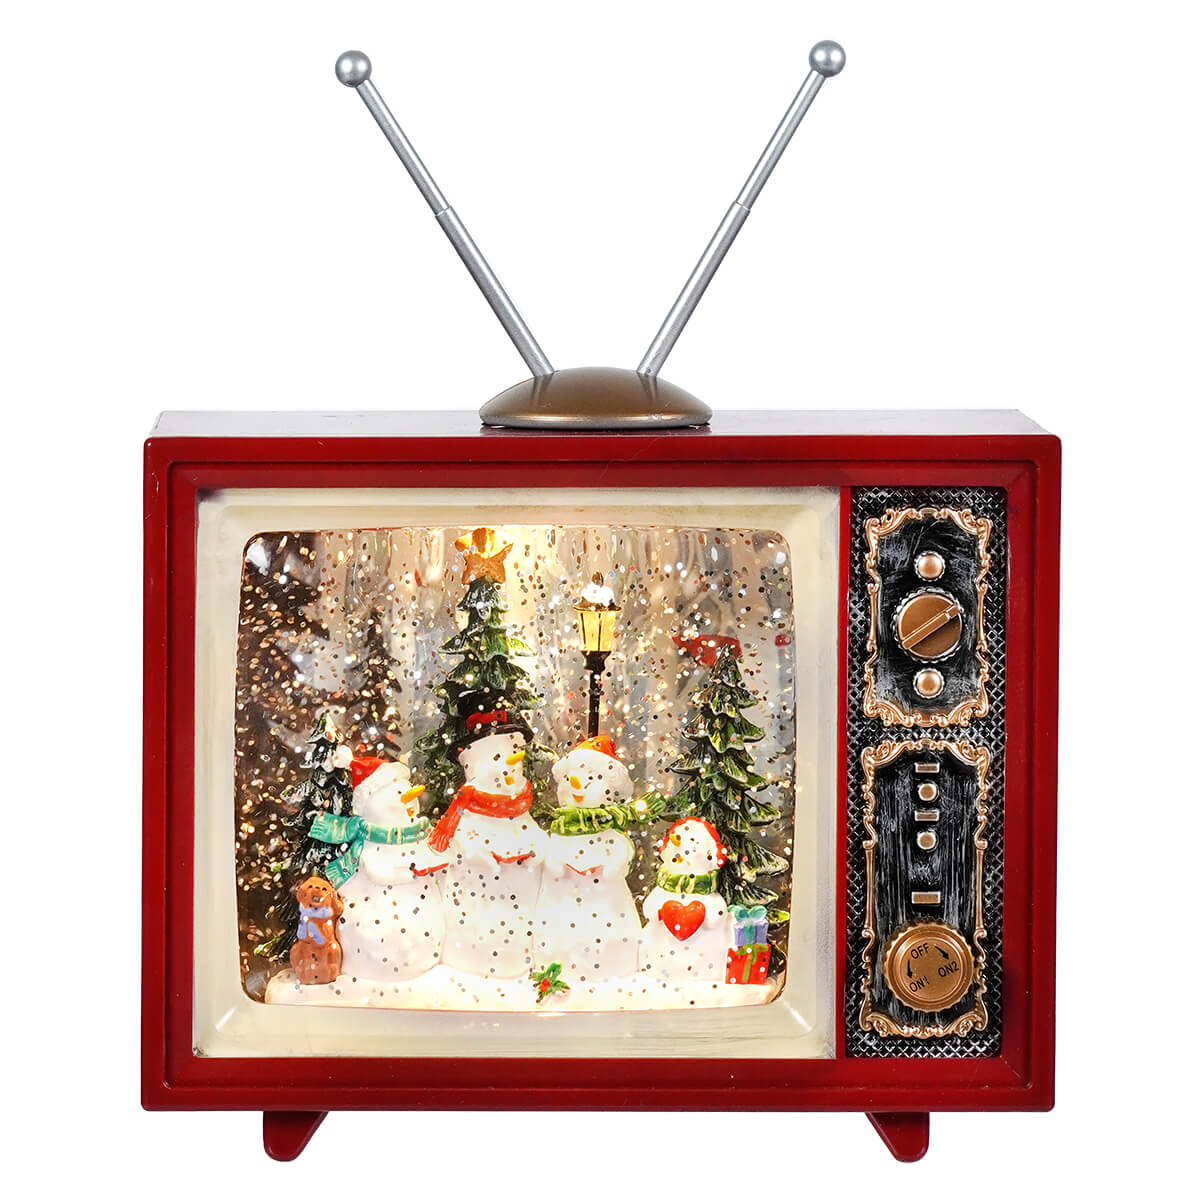 Lighted Musical Snowman Holiday Scene Spinning Water Globe Television